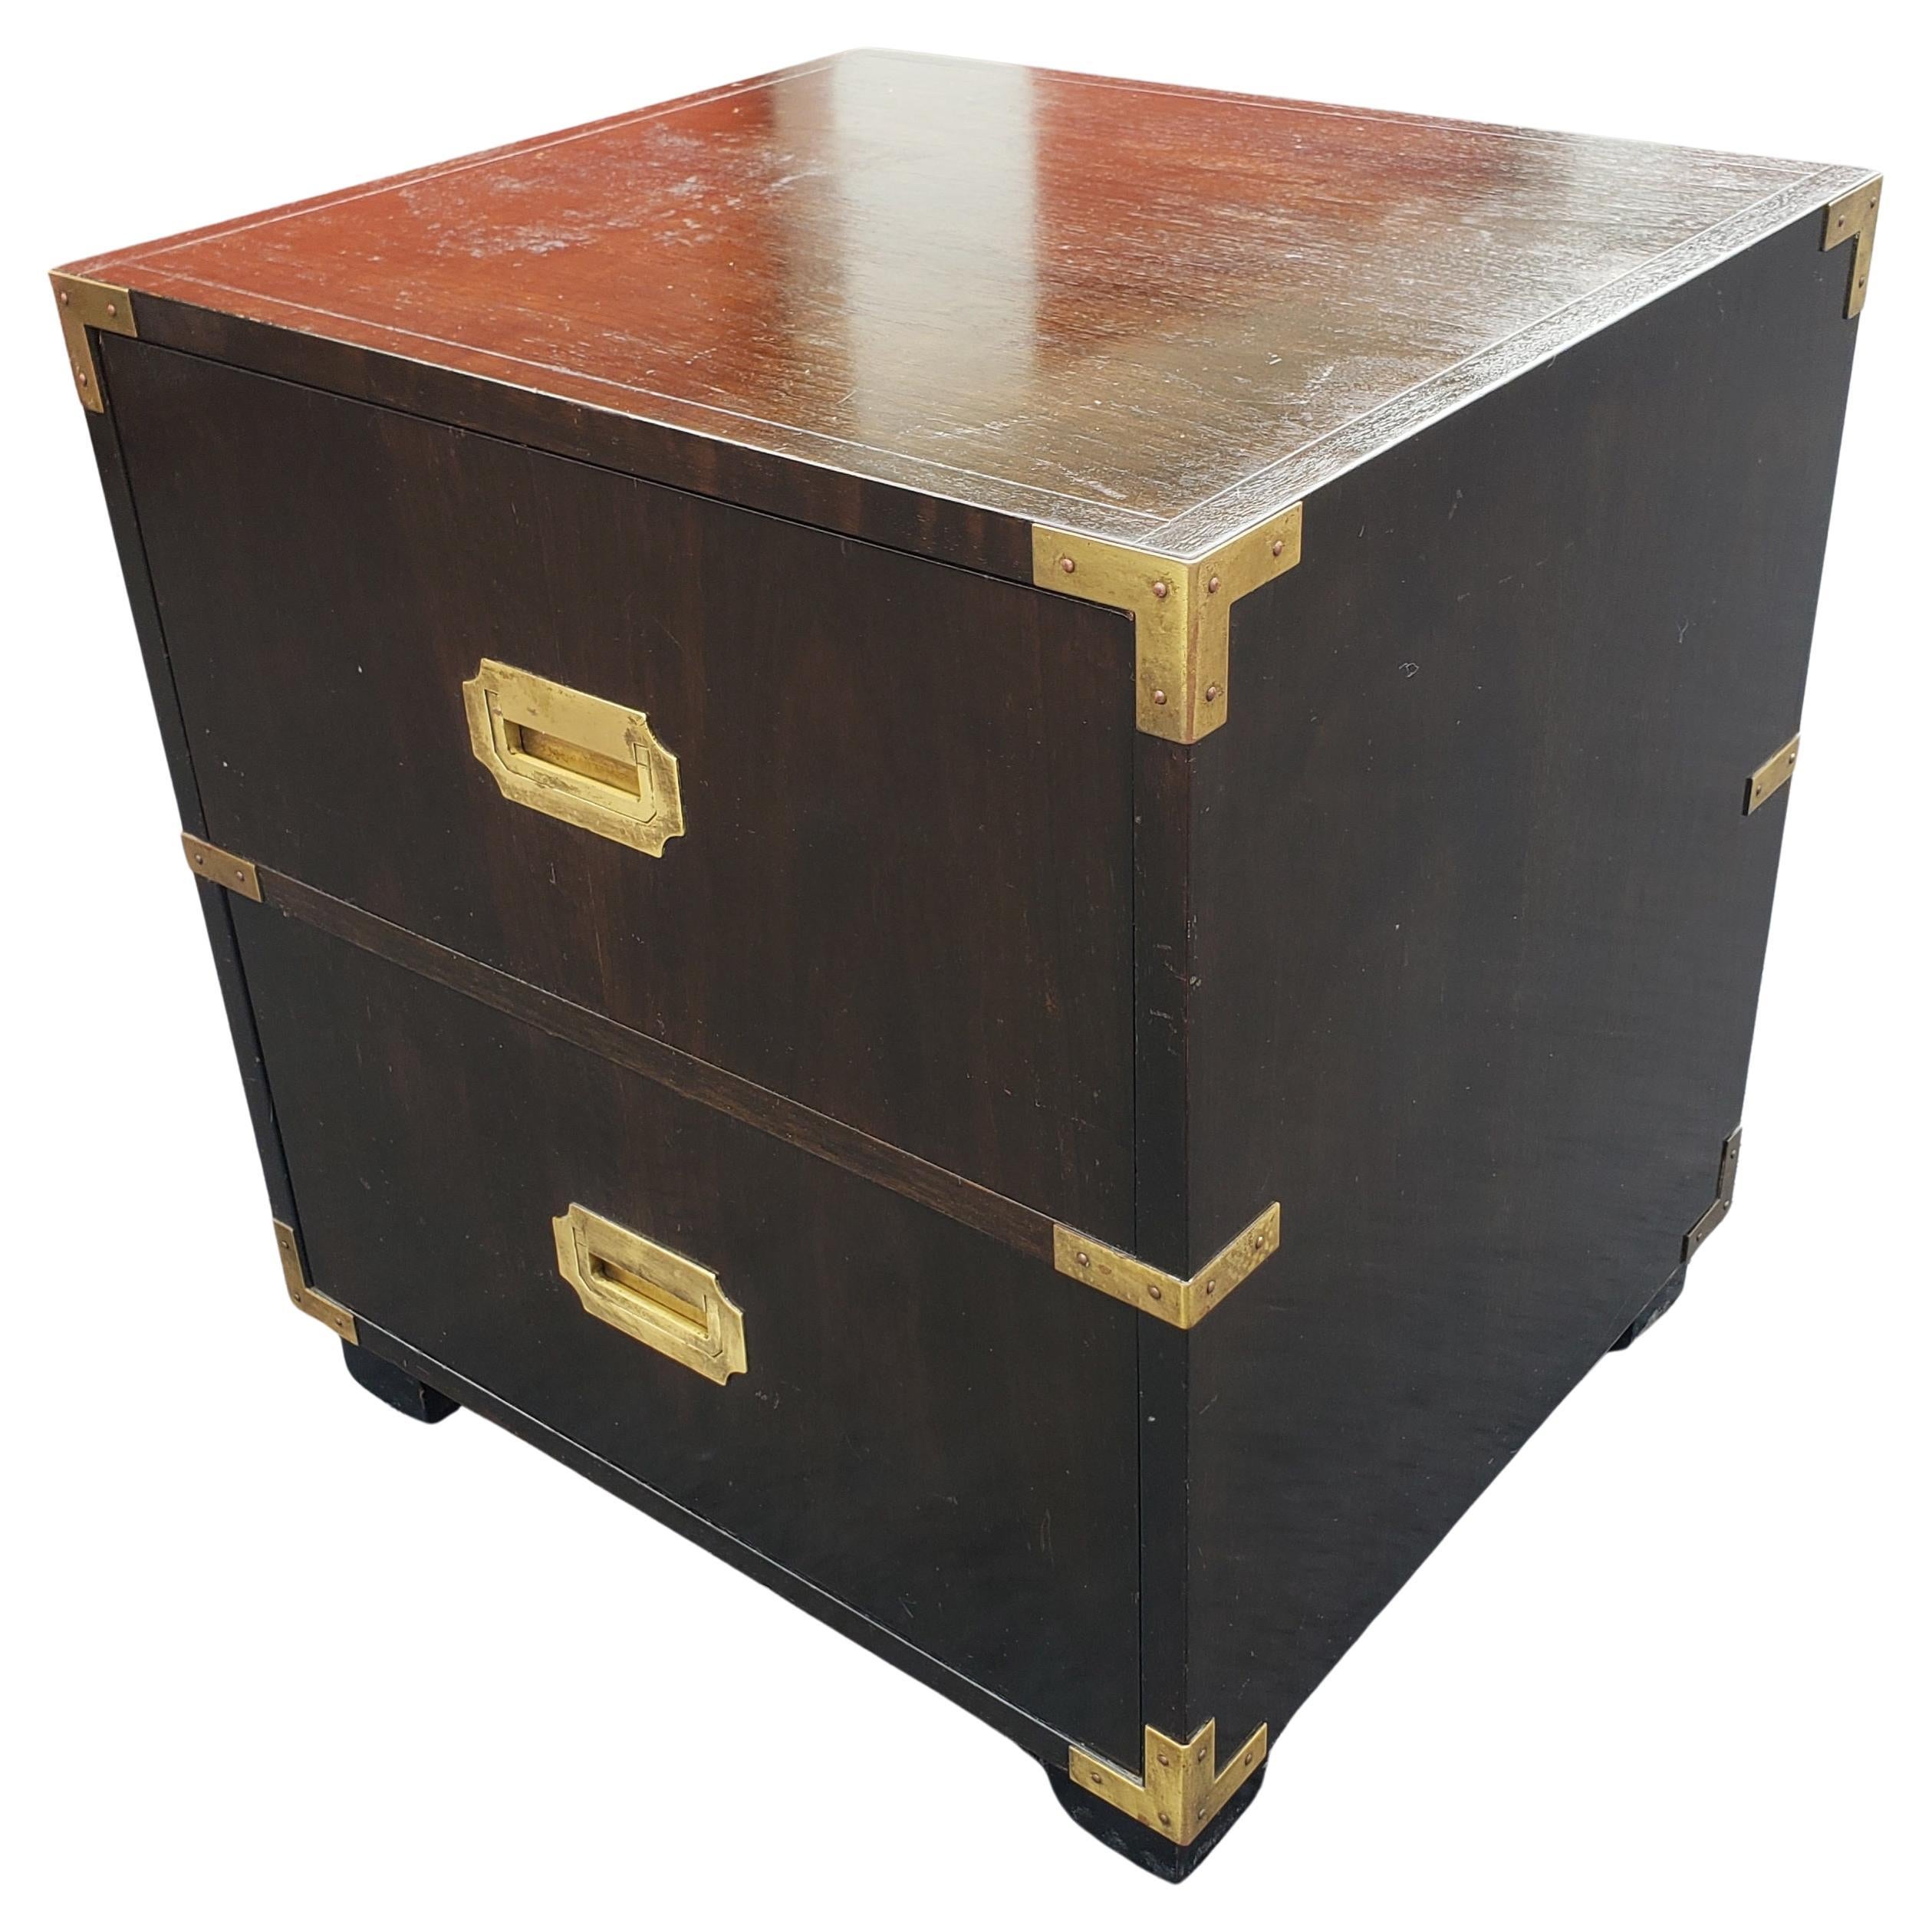 An exceptional Hollywood Regency Ebonized Campaign style nightstand or side table by Baker Furniture. The nightstand features gorgeous wood grain with original campaign brass hardware. It offers good storage, with a single dovetailed bottom drawer